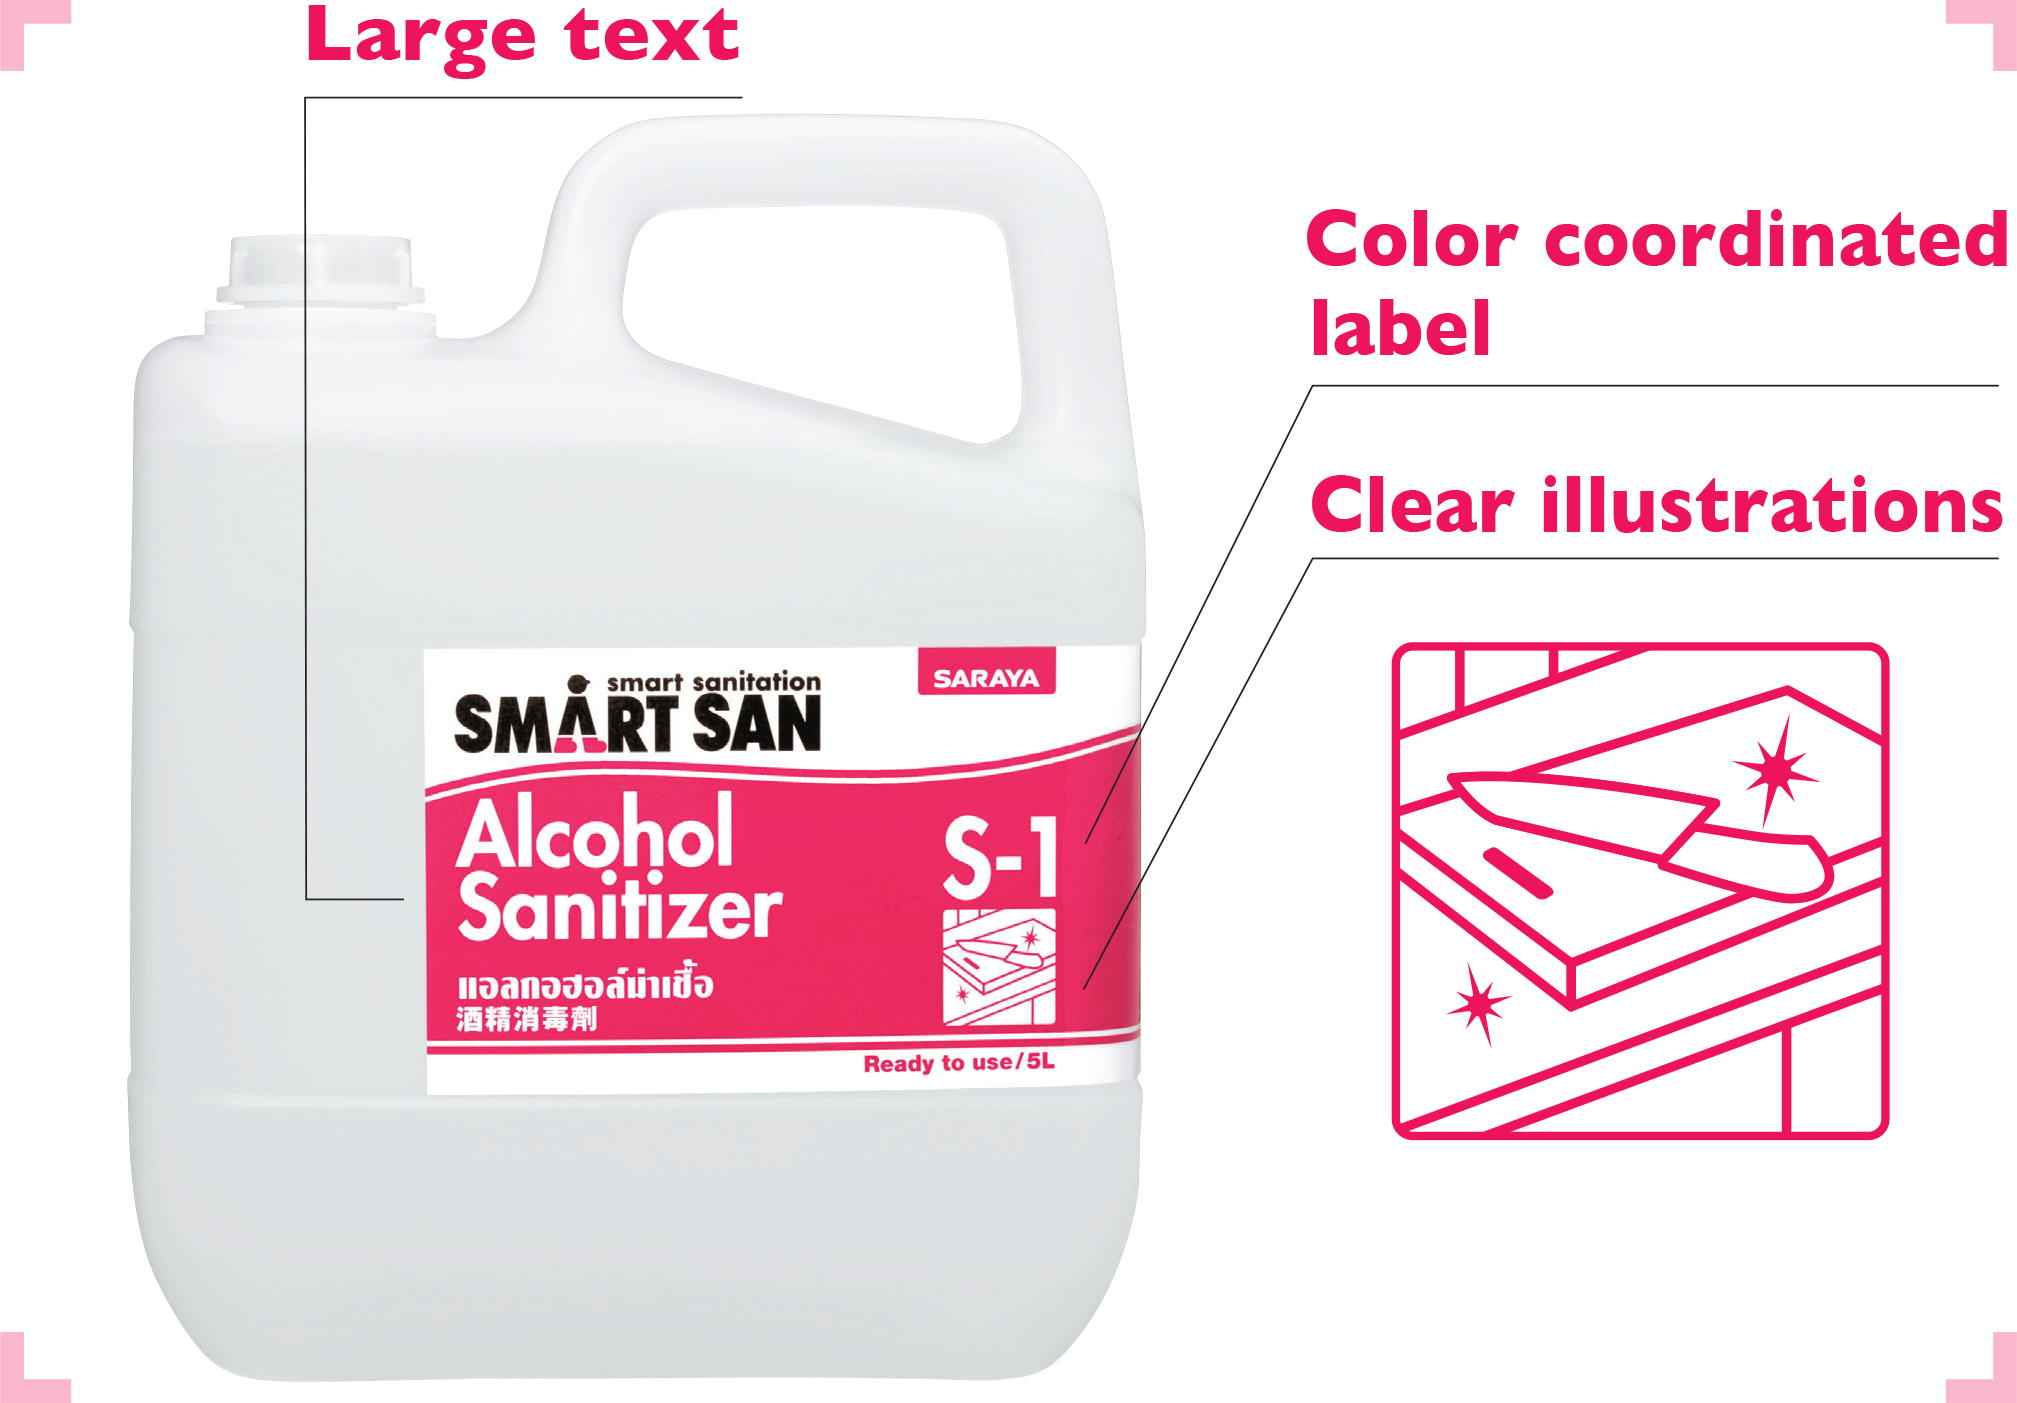 Smart San uses simple labelinng for an easier undertanding and increased compliance.